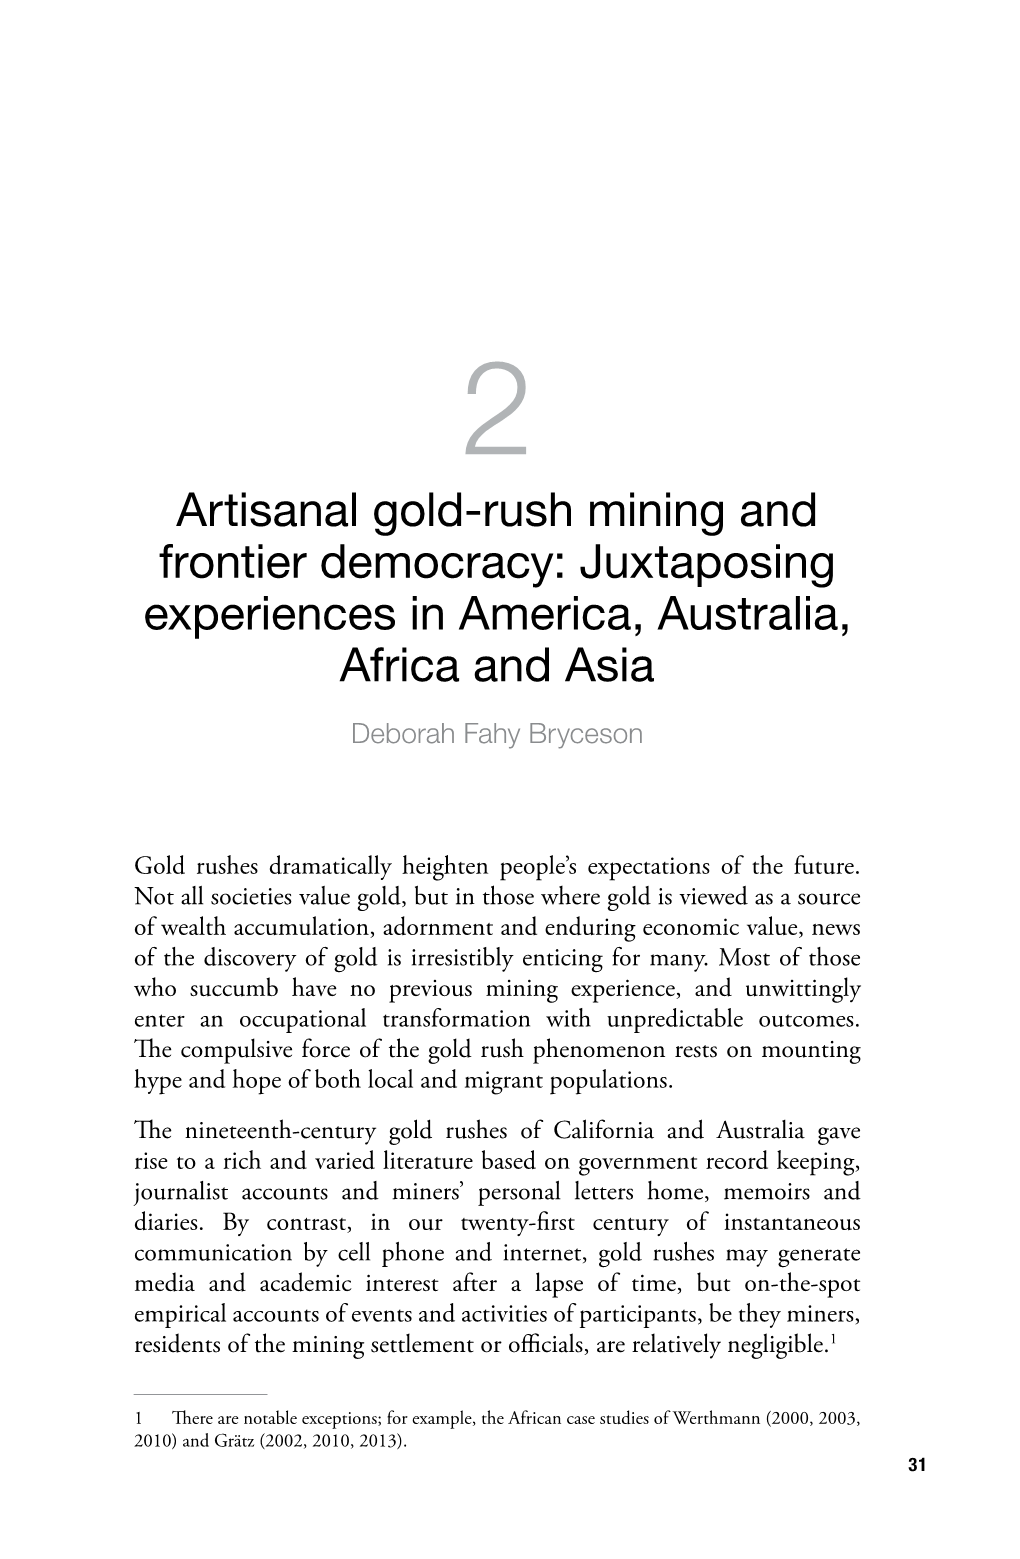 Artisanal Gold-Rush Mining and Frontier Democracy: Juxtaposing Experiences in America, Australia, Africa and Asia Deborah Fahy Bryceson